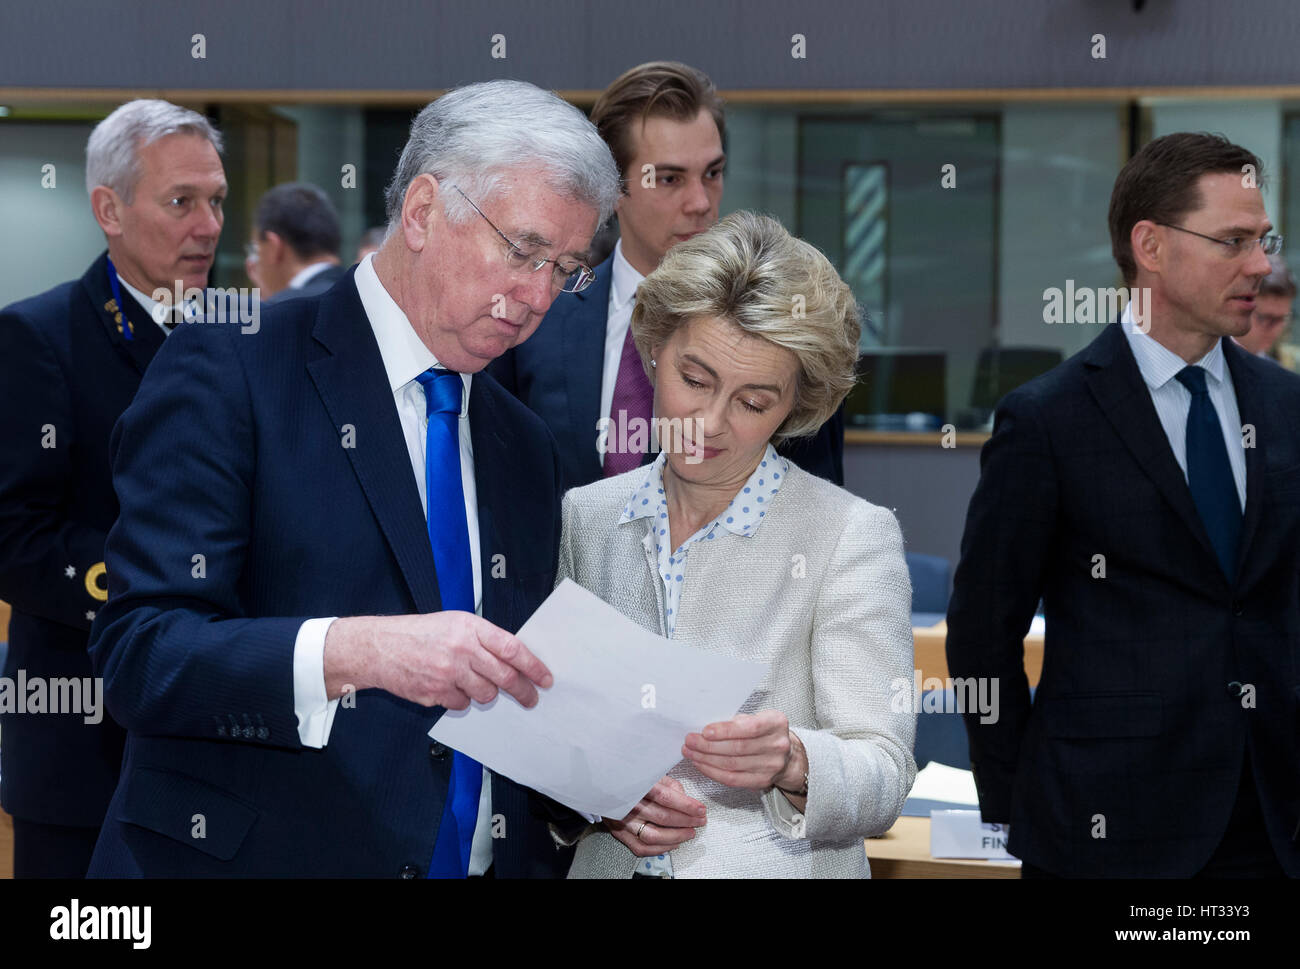 March 6, 2017 - Brussels, Belgium: United Kingdom Secretary of State for Defense Sir Michael Fallon (L) is talking with the German Minister of Defense Ursula Gertrud von der Leyen (R) during an EU Defense and foreign affairs Ministers meeting in the Europa building, the EU Council headquarter. - NO WIRE SERVICE- Photo: Thierry Monasse/dpa Photo: Thierry Monasse/dpa Stock Photo